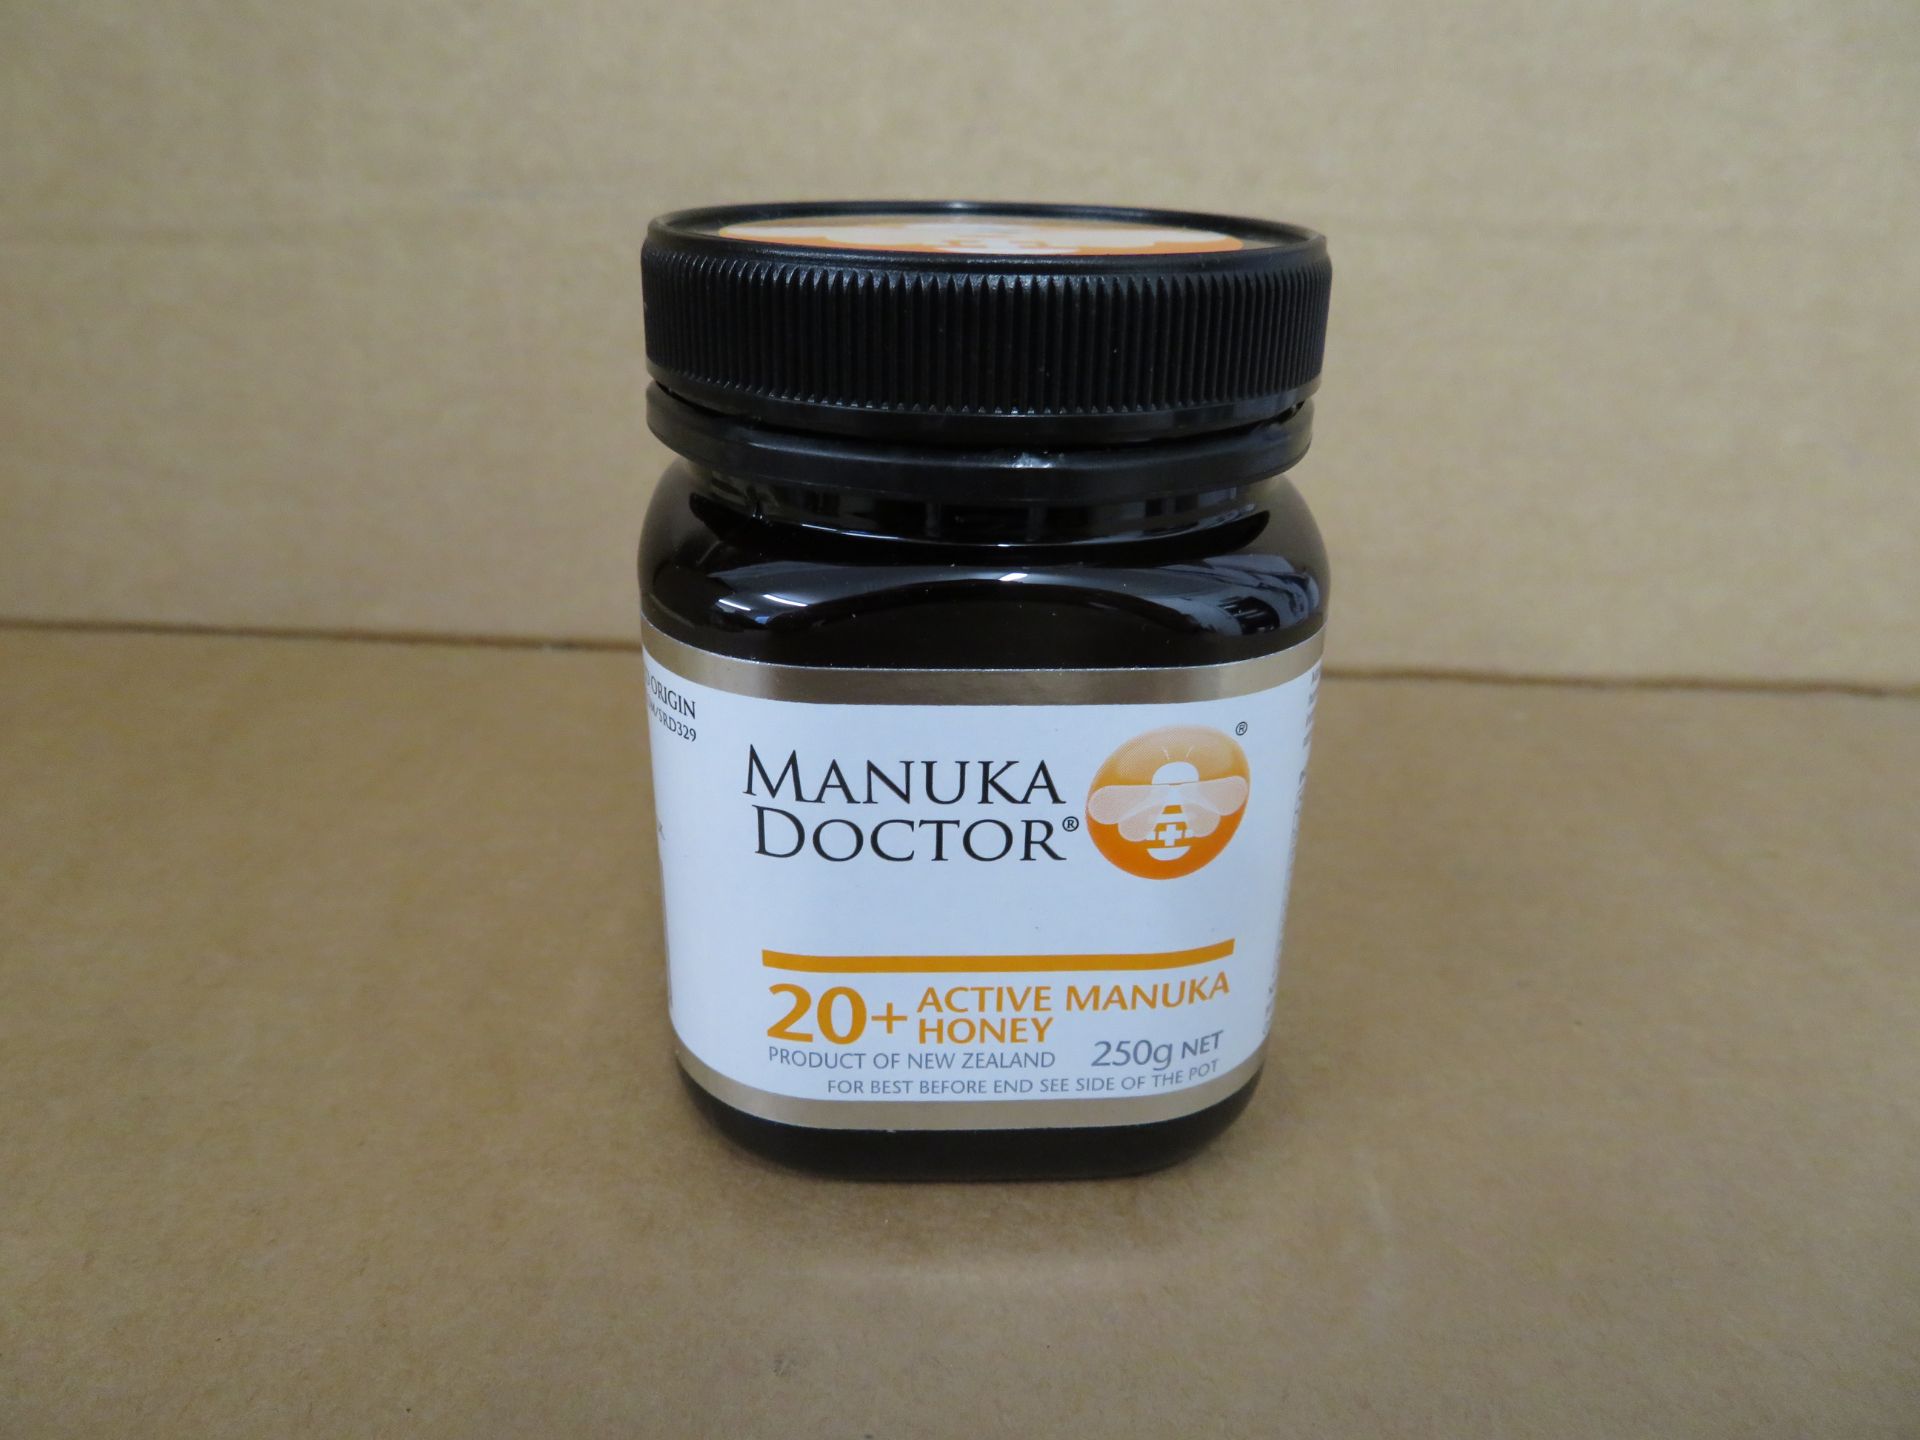 12 x 250G Manuka Doctor 20+ Active Manuka Honey. Product of New Zealand. RRP £30 each, giving this - Image 3 of 3